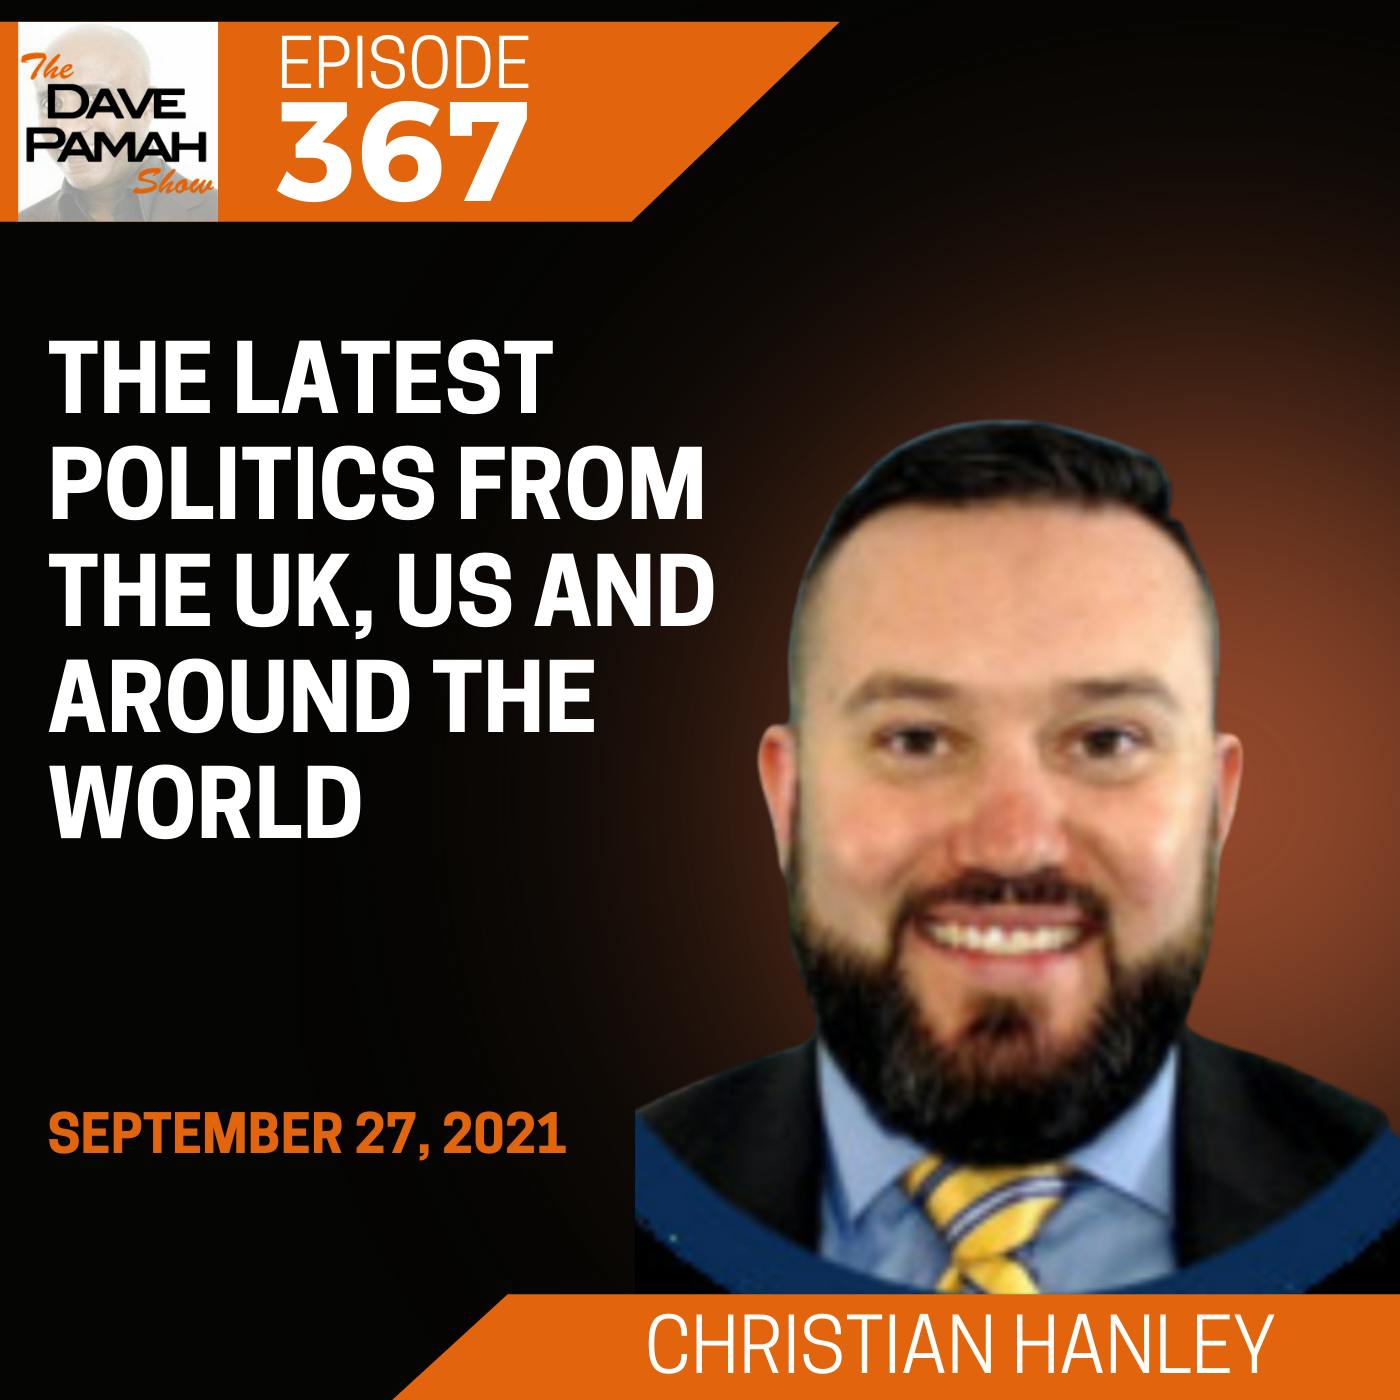 The Latest Politics from the UK, US and around the World with Christian Hanley